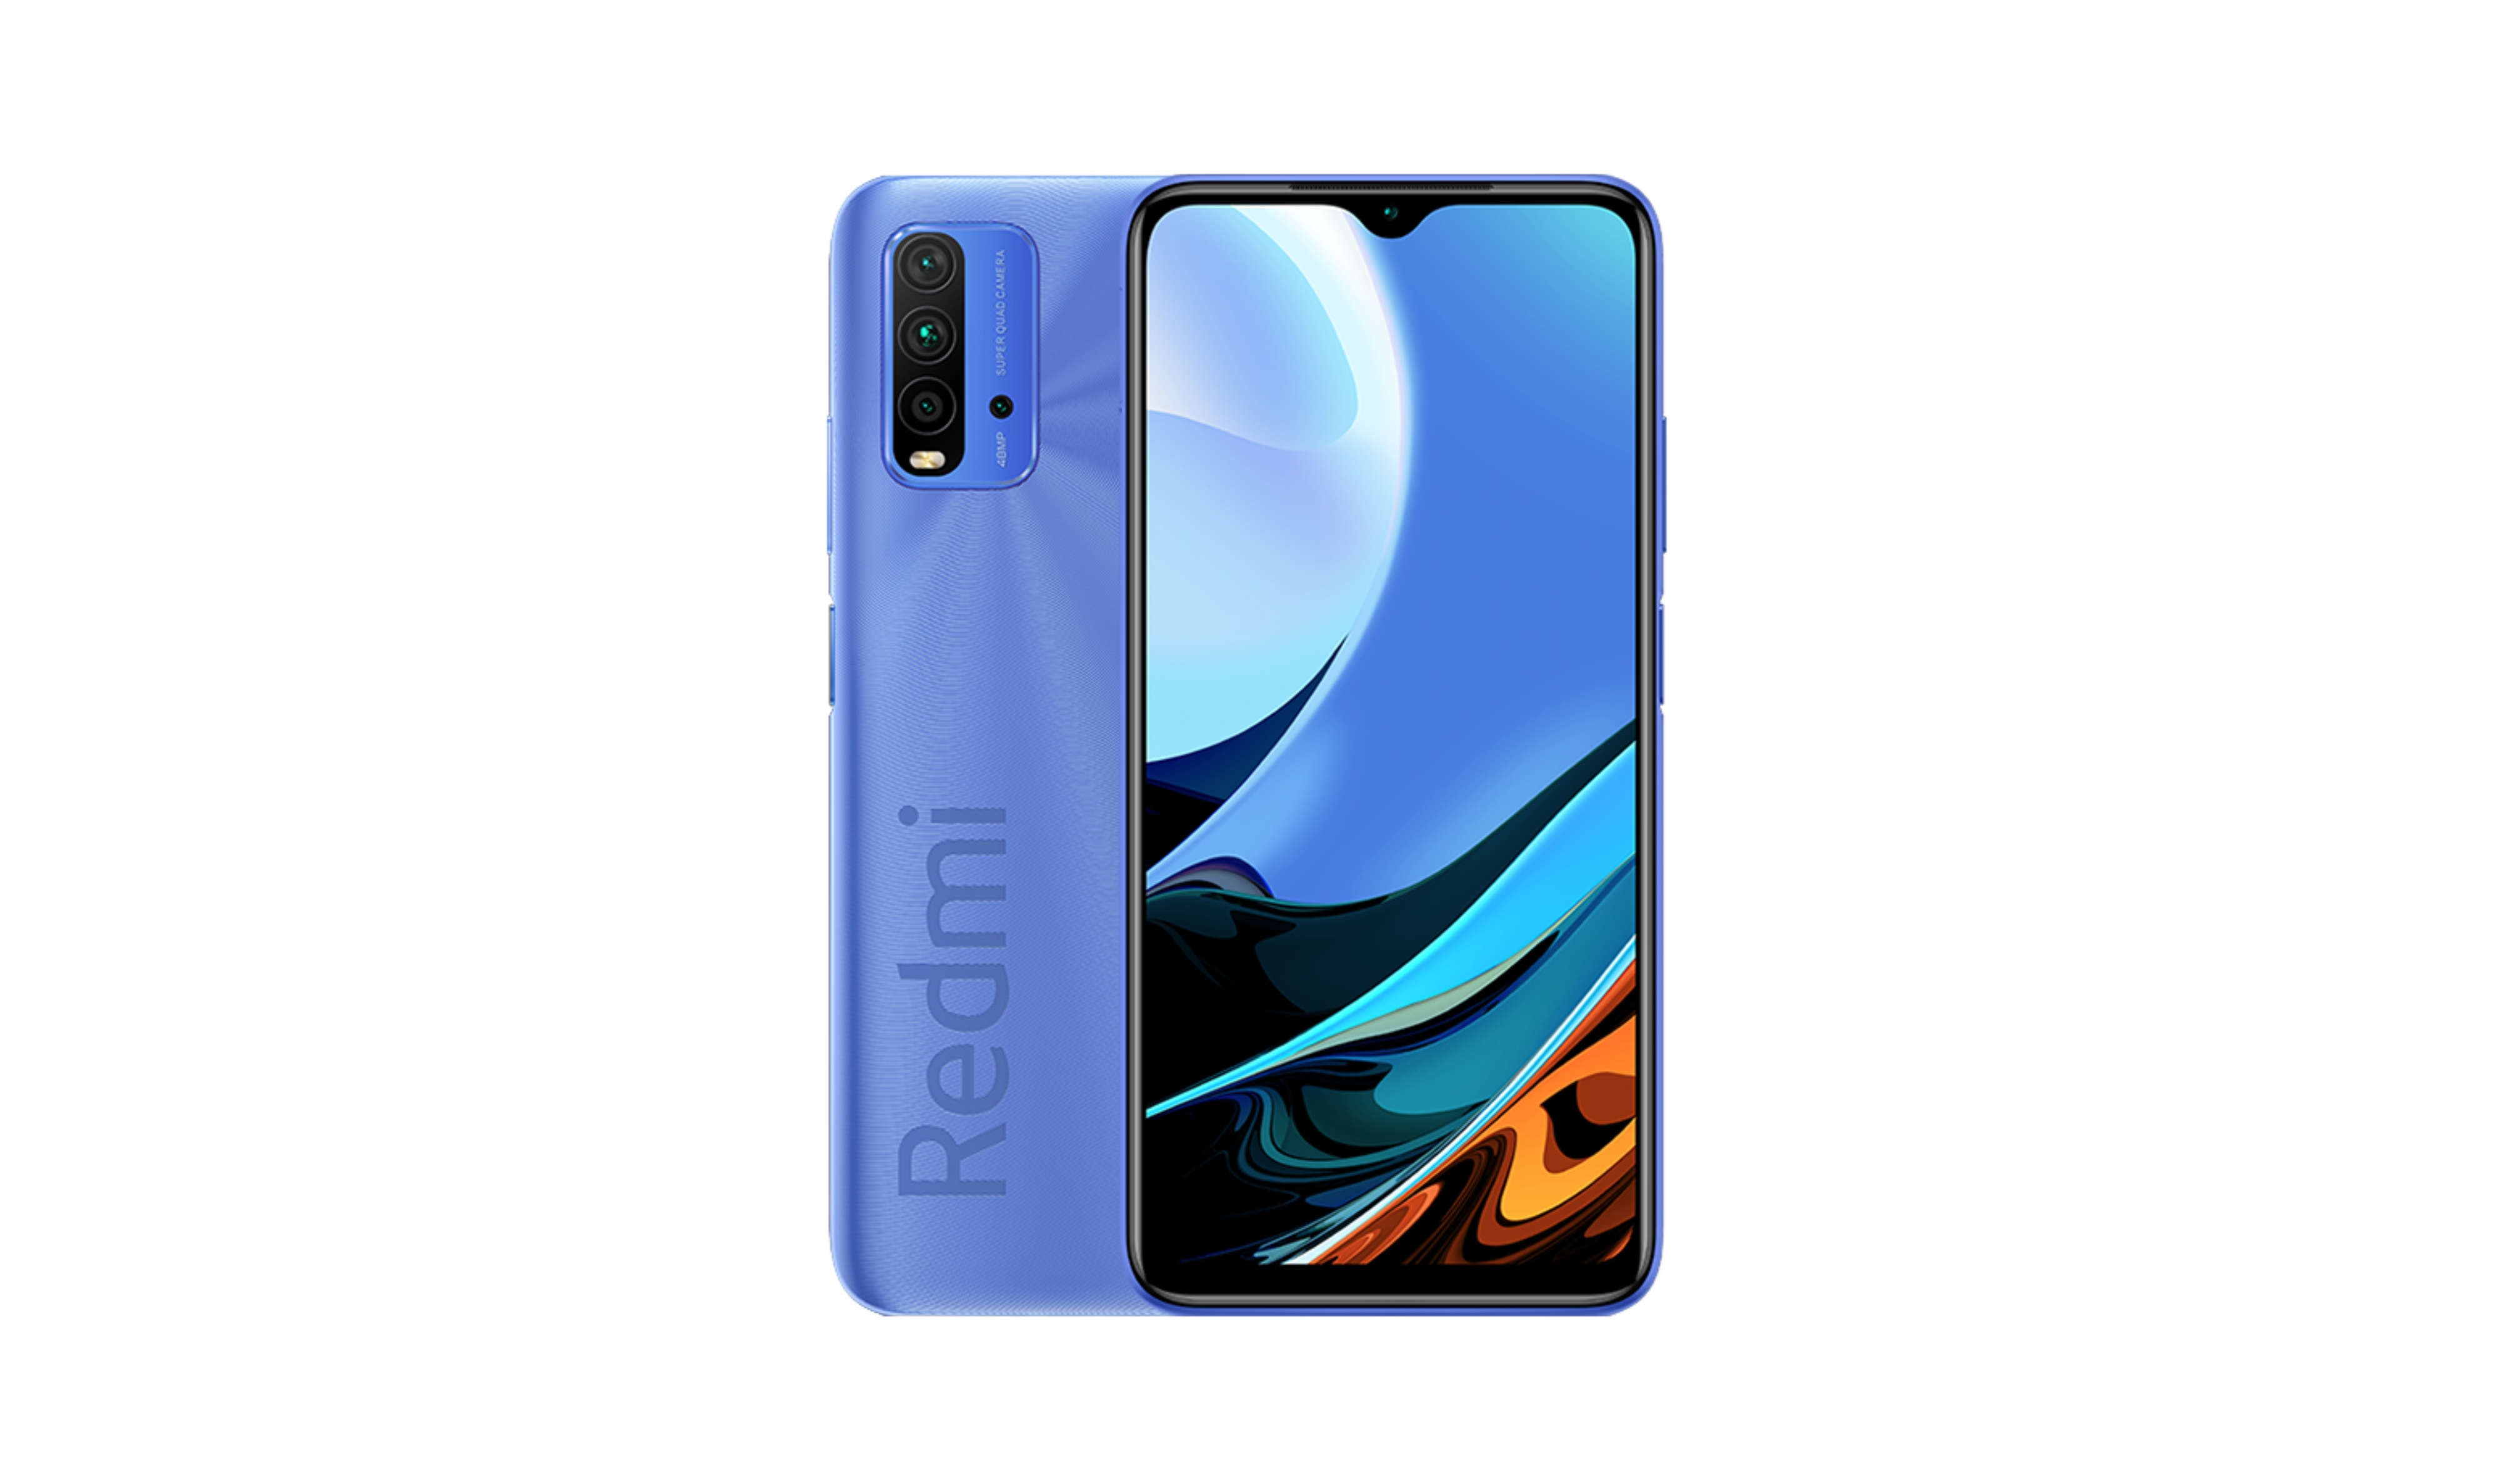 Redmi 9 Power 6GB + 128GB variant launched in India for ₹12,999 ($180) -  Gizmochina